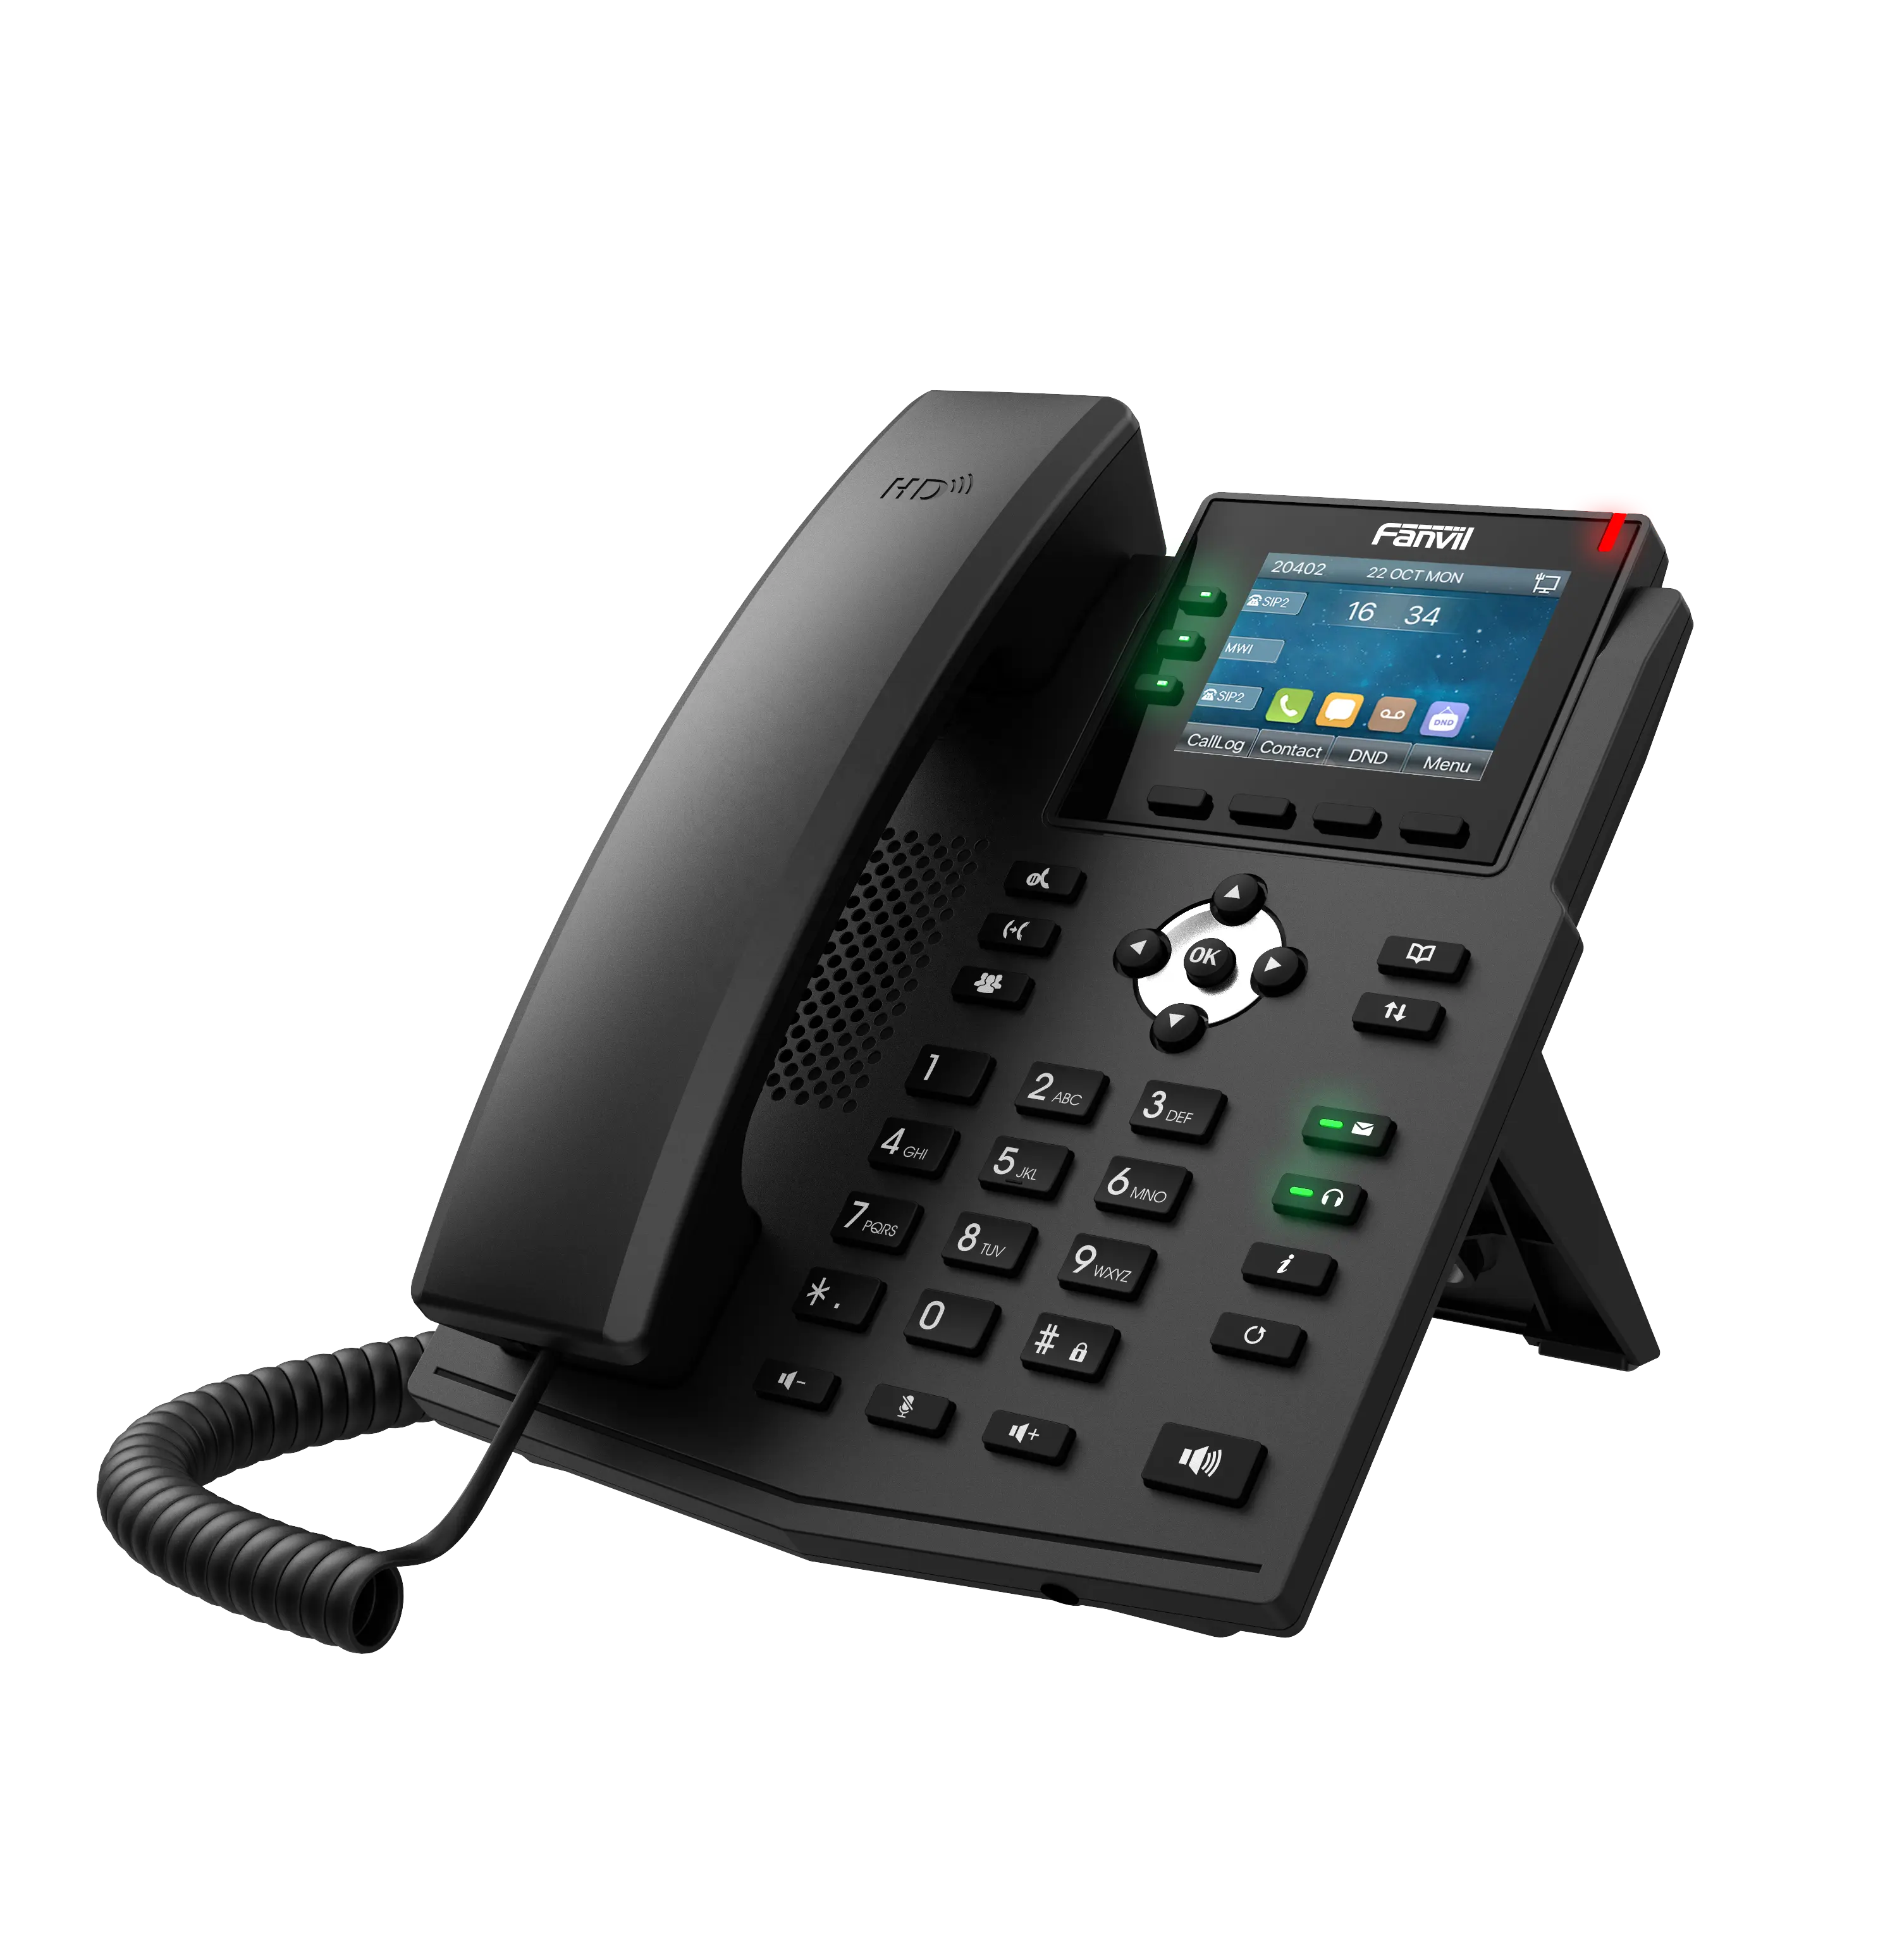 New Poe Support Fanvil X3U Ip Phone Business Telephone Voip Phone